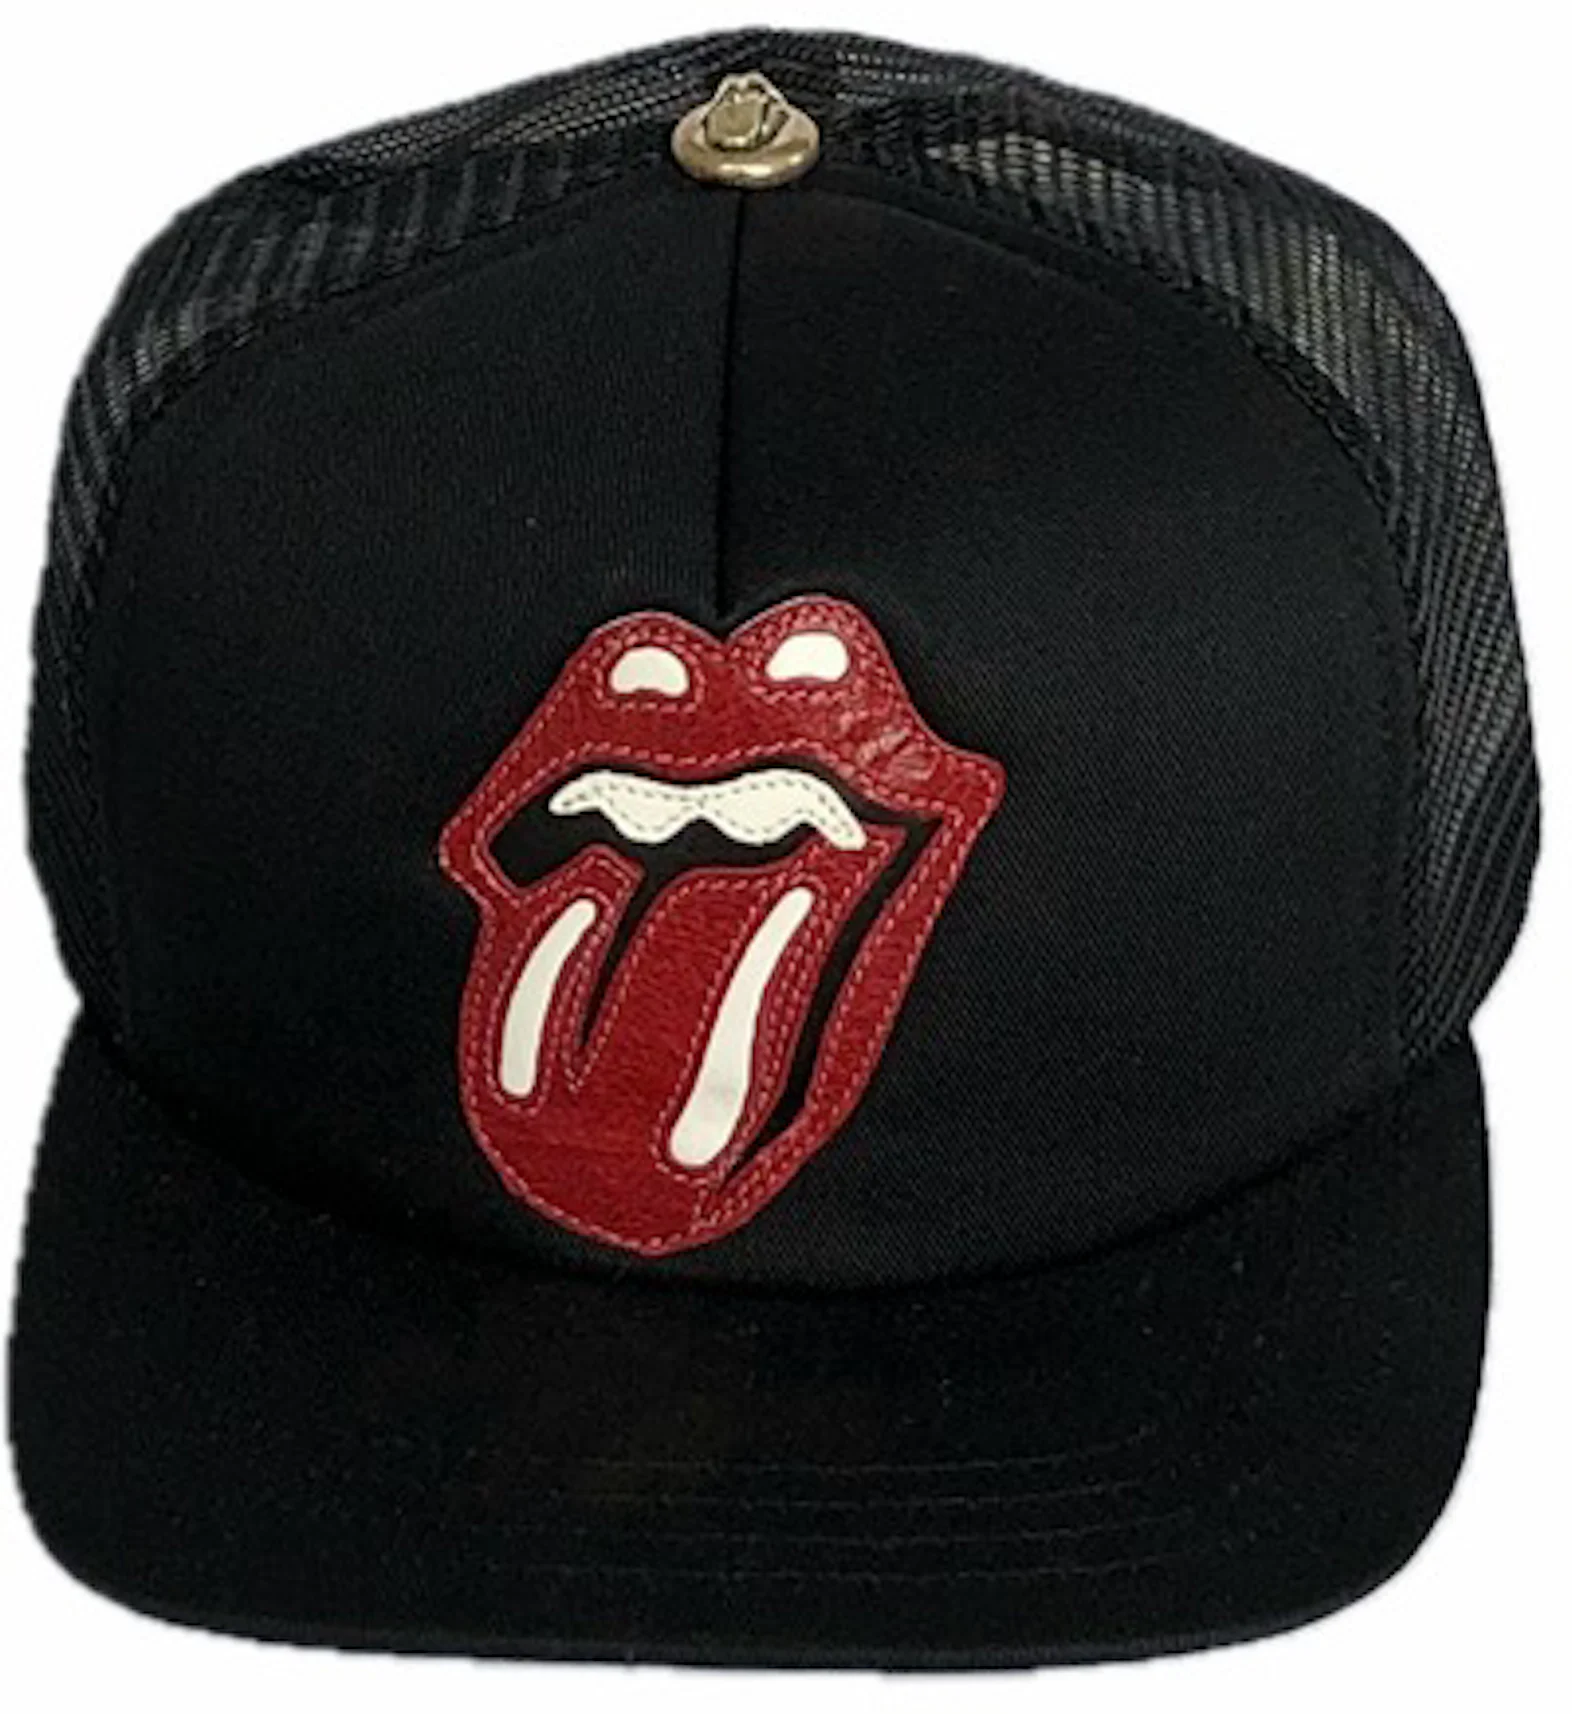 Chrome Hearts x Rolling Stones Leather Patch Trucker Hat Black